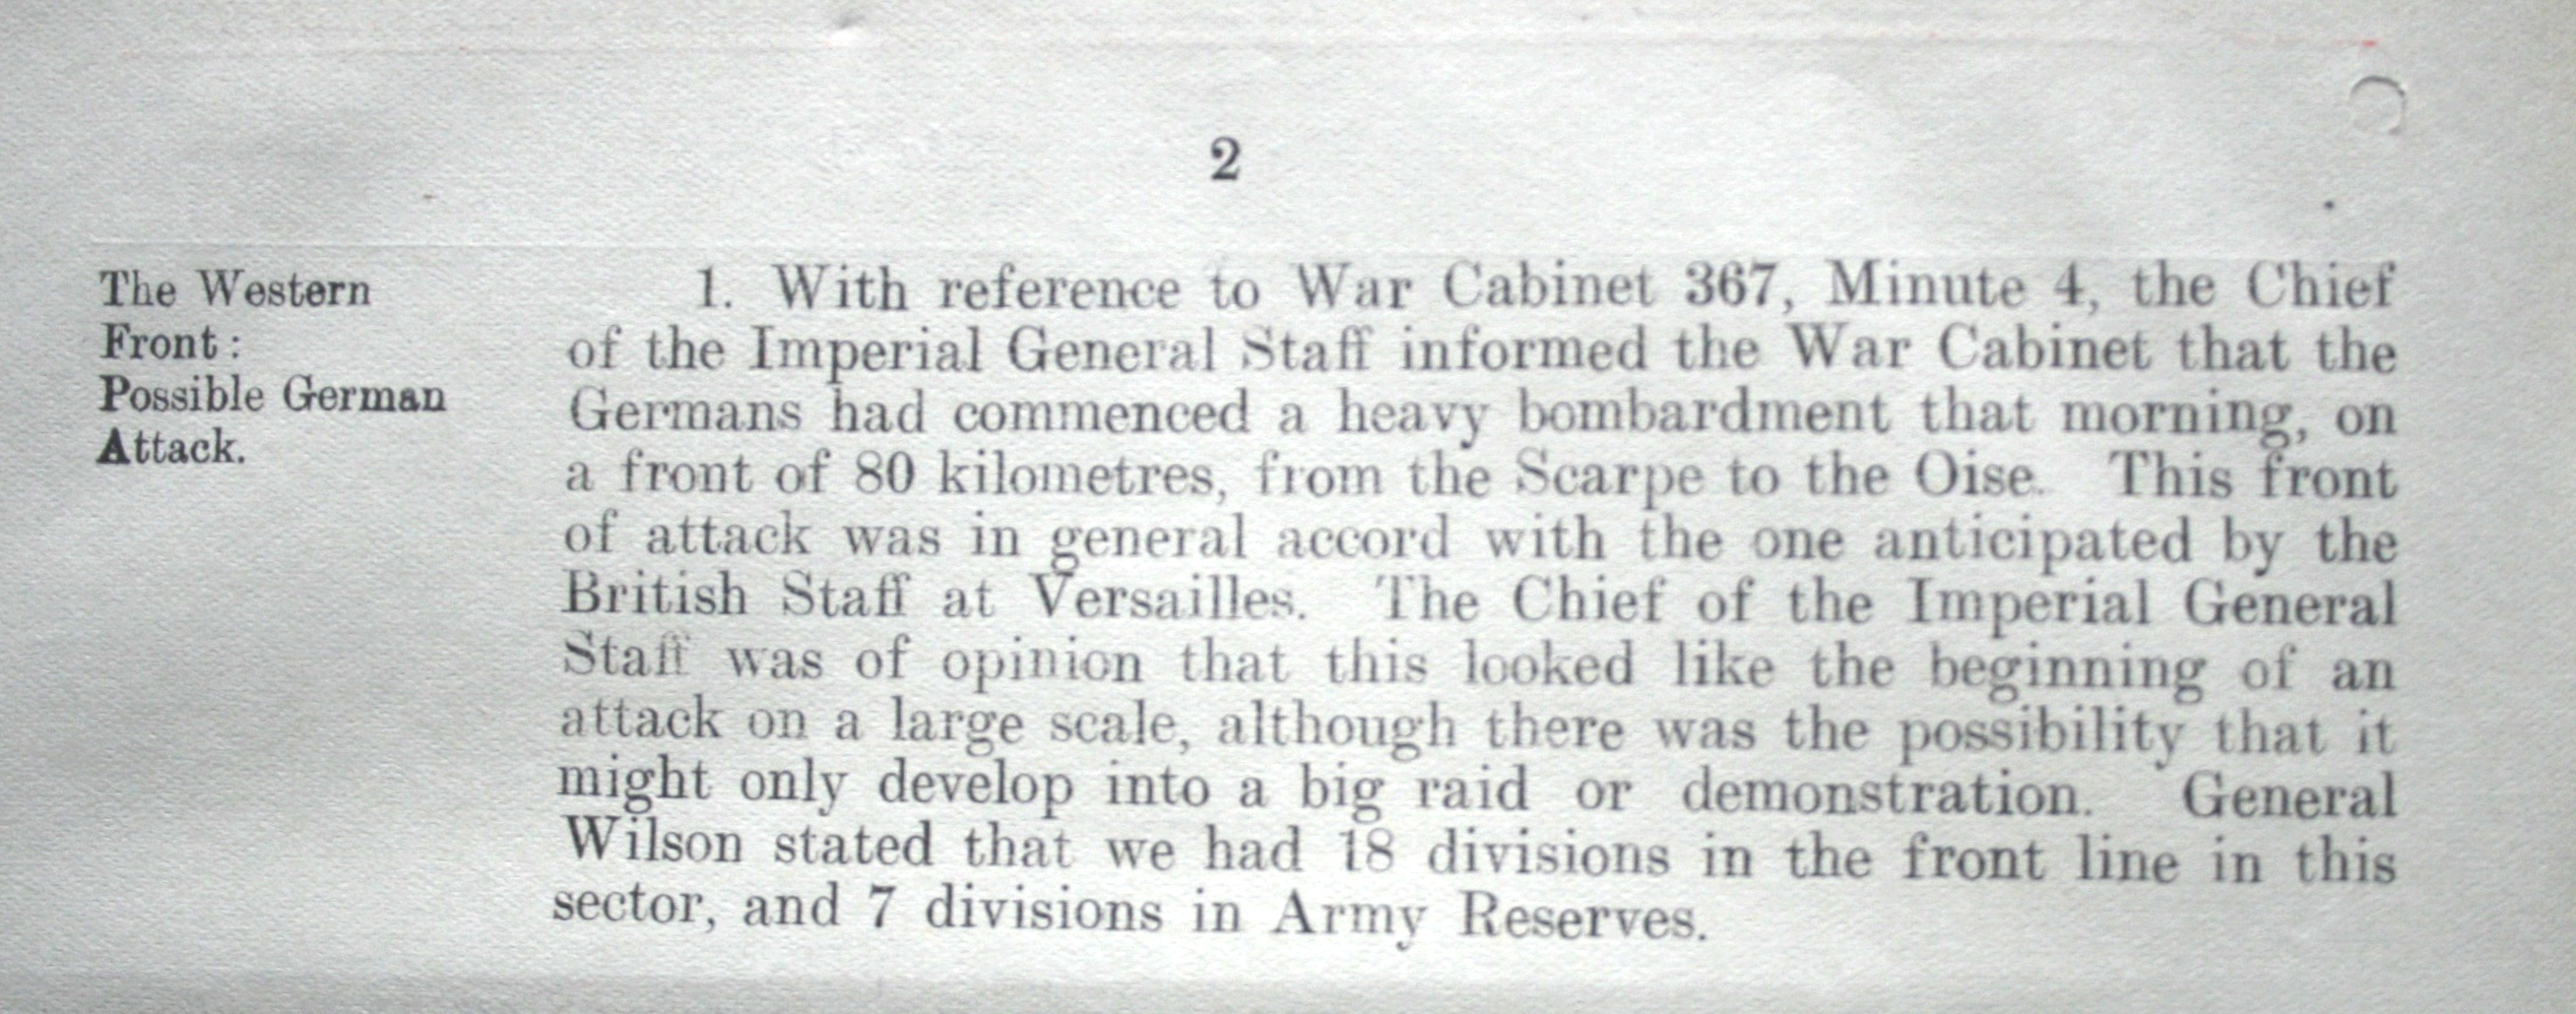 War Cabinet Meeting 369, p.2, 21 March 1918